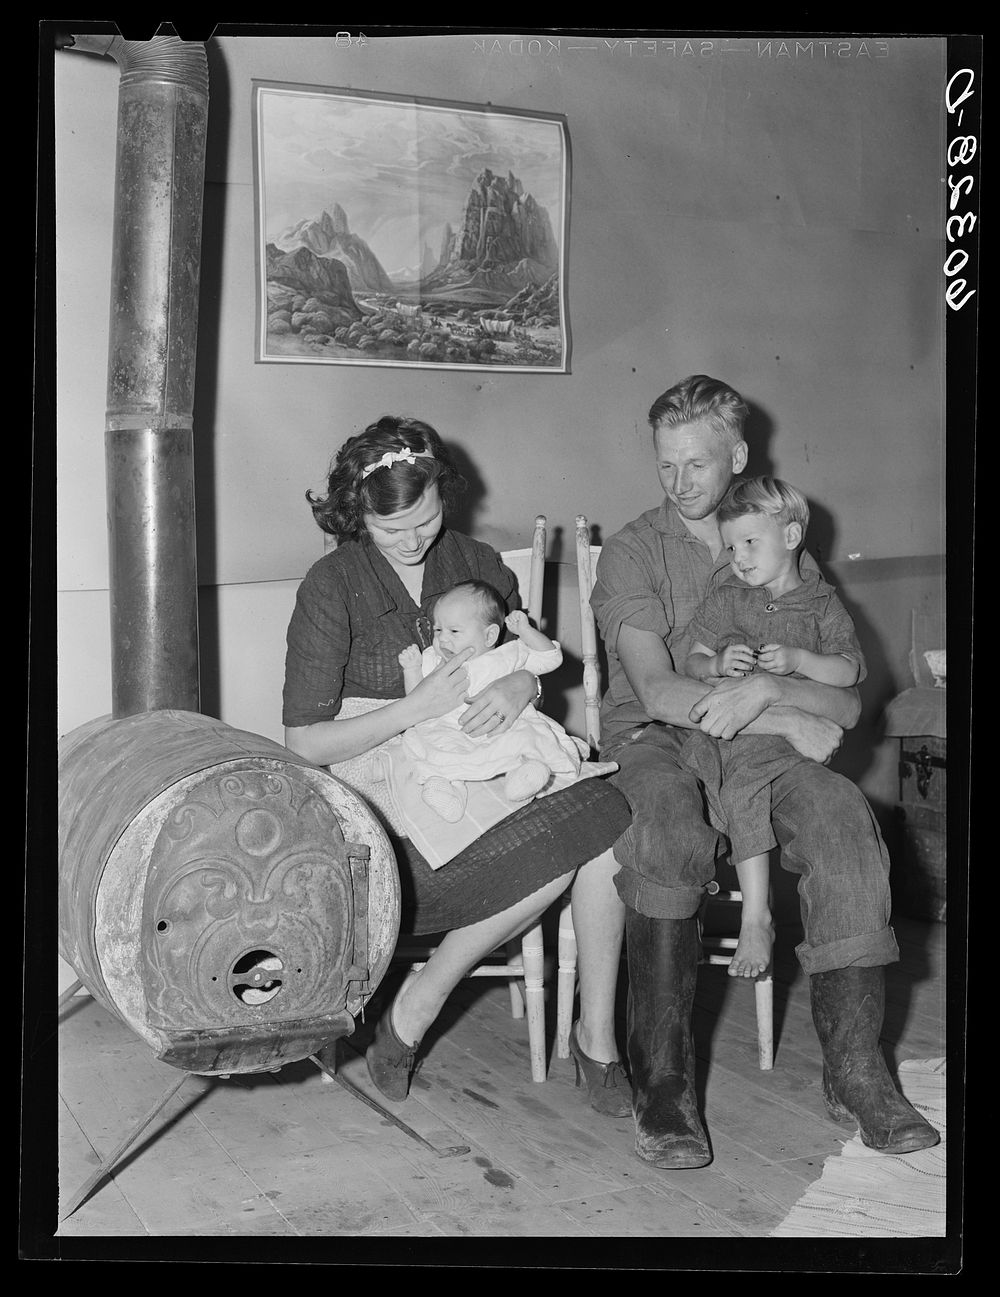 Rehabilitation borrower and his family. Chippewa County, Wisconsin. Sourced from the Library of Congress.